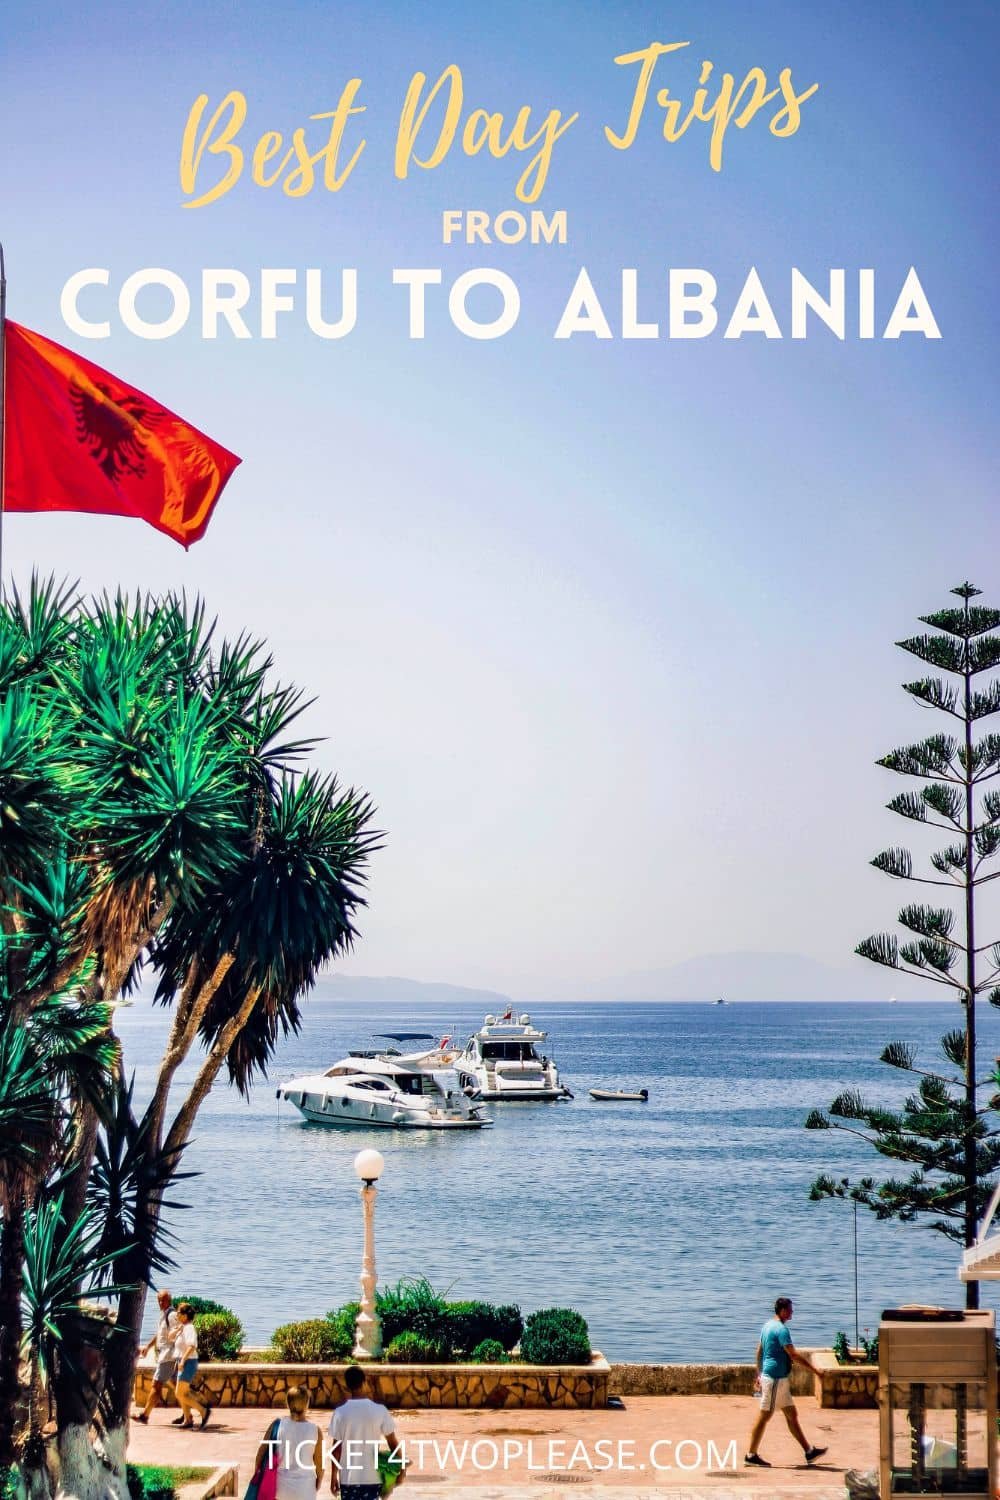 Best day trips from Corfu to Albania